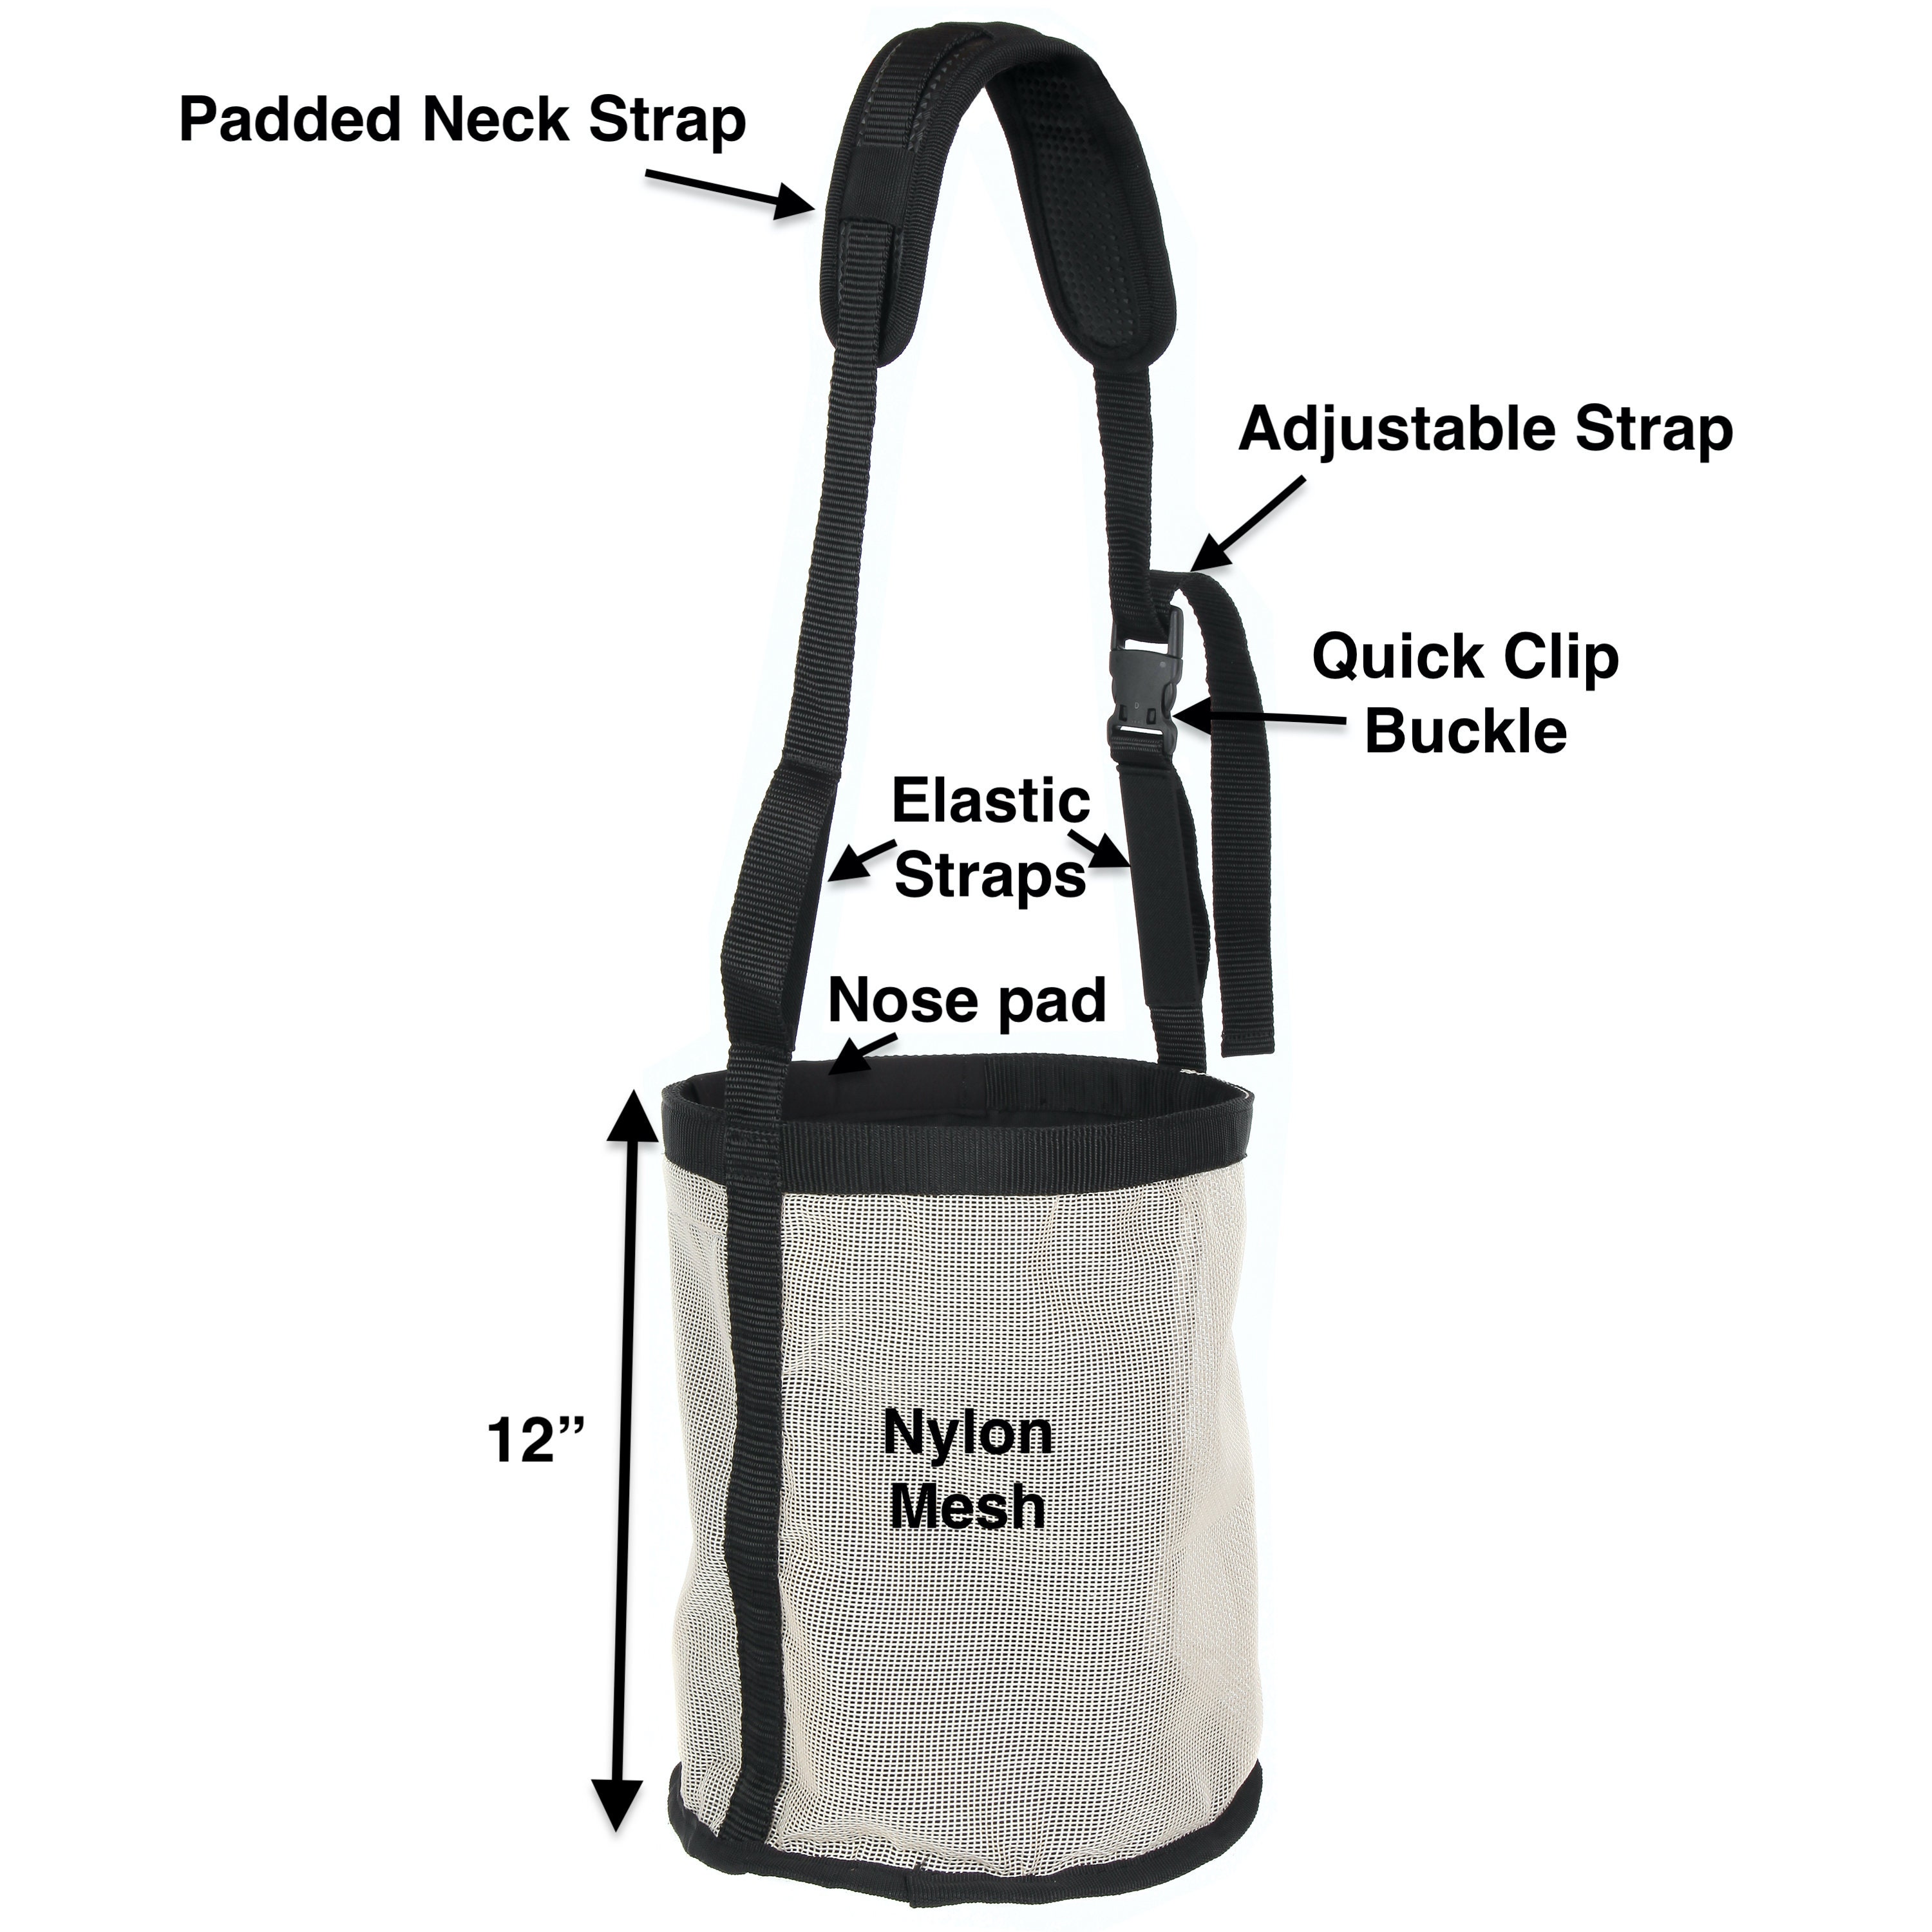 Heavy Duty Nylon Mesh Grain Feed Bag Comfort Neck Pad and Nose Pad- Large Majestic Ally Horse Feed Bag Adjustable Strap with Durable Snap and Elastic Straps 